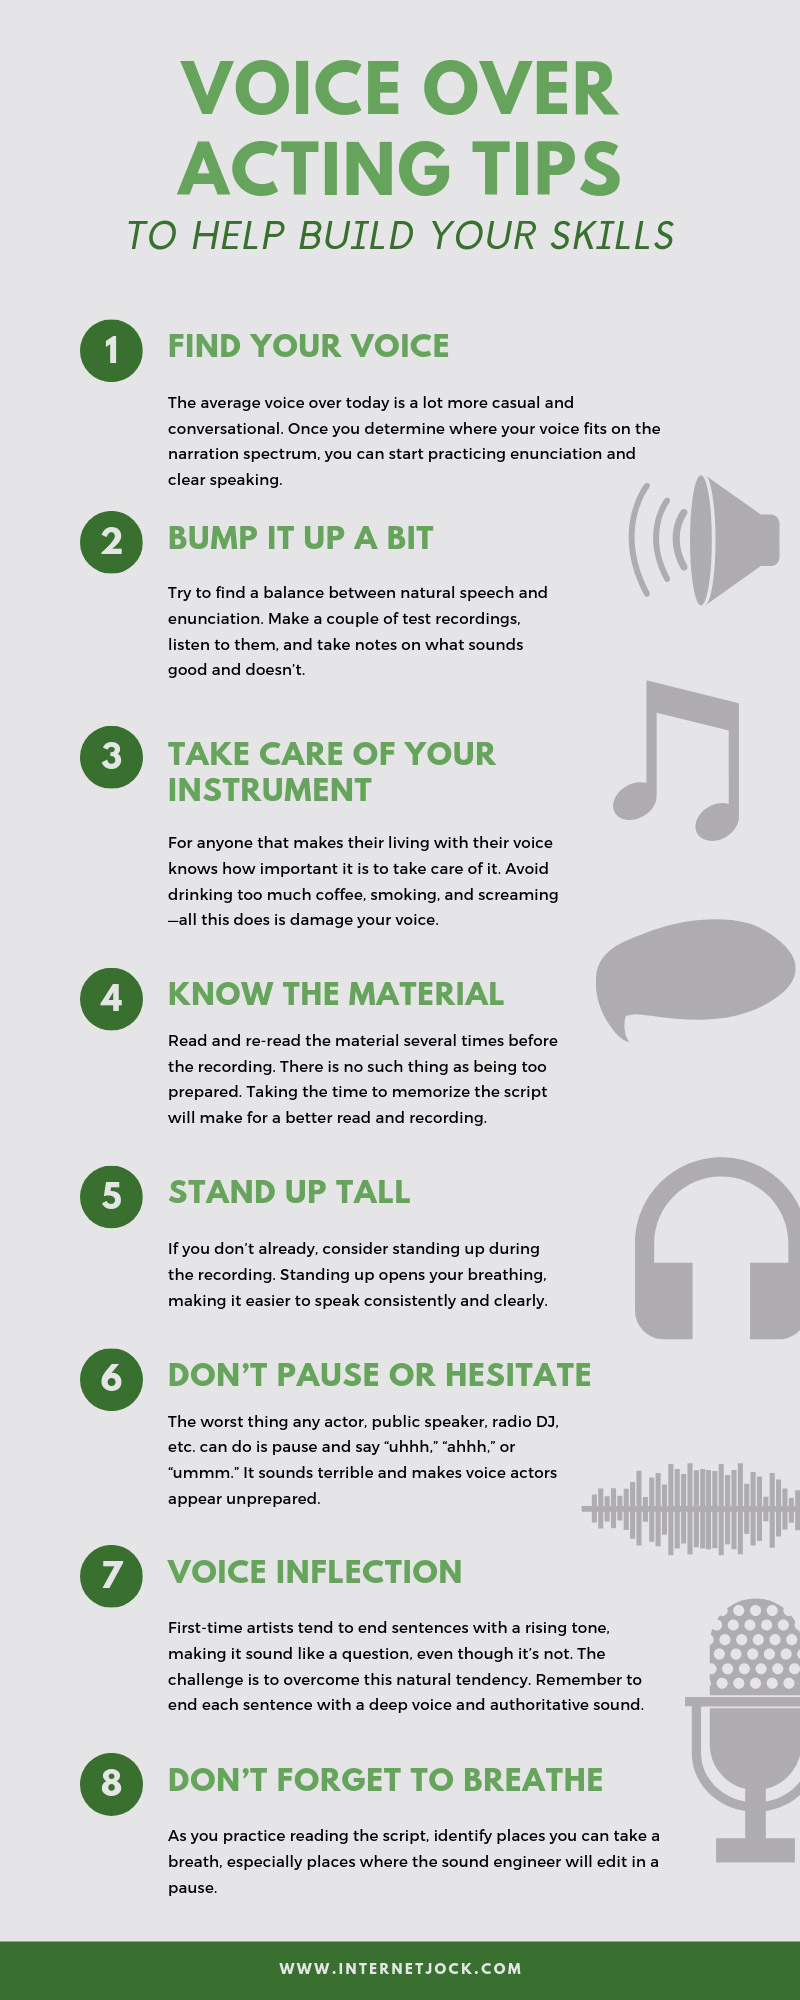 Voice over acting tips Infographic